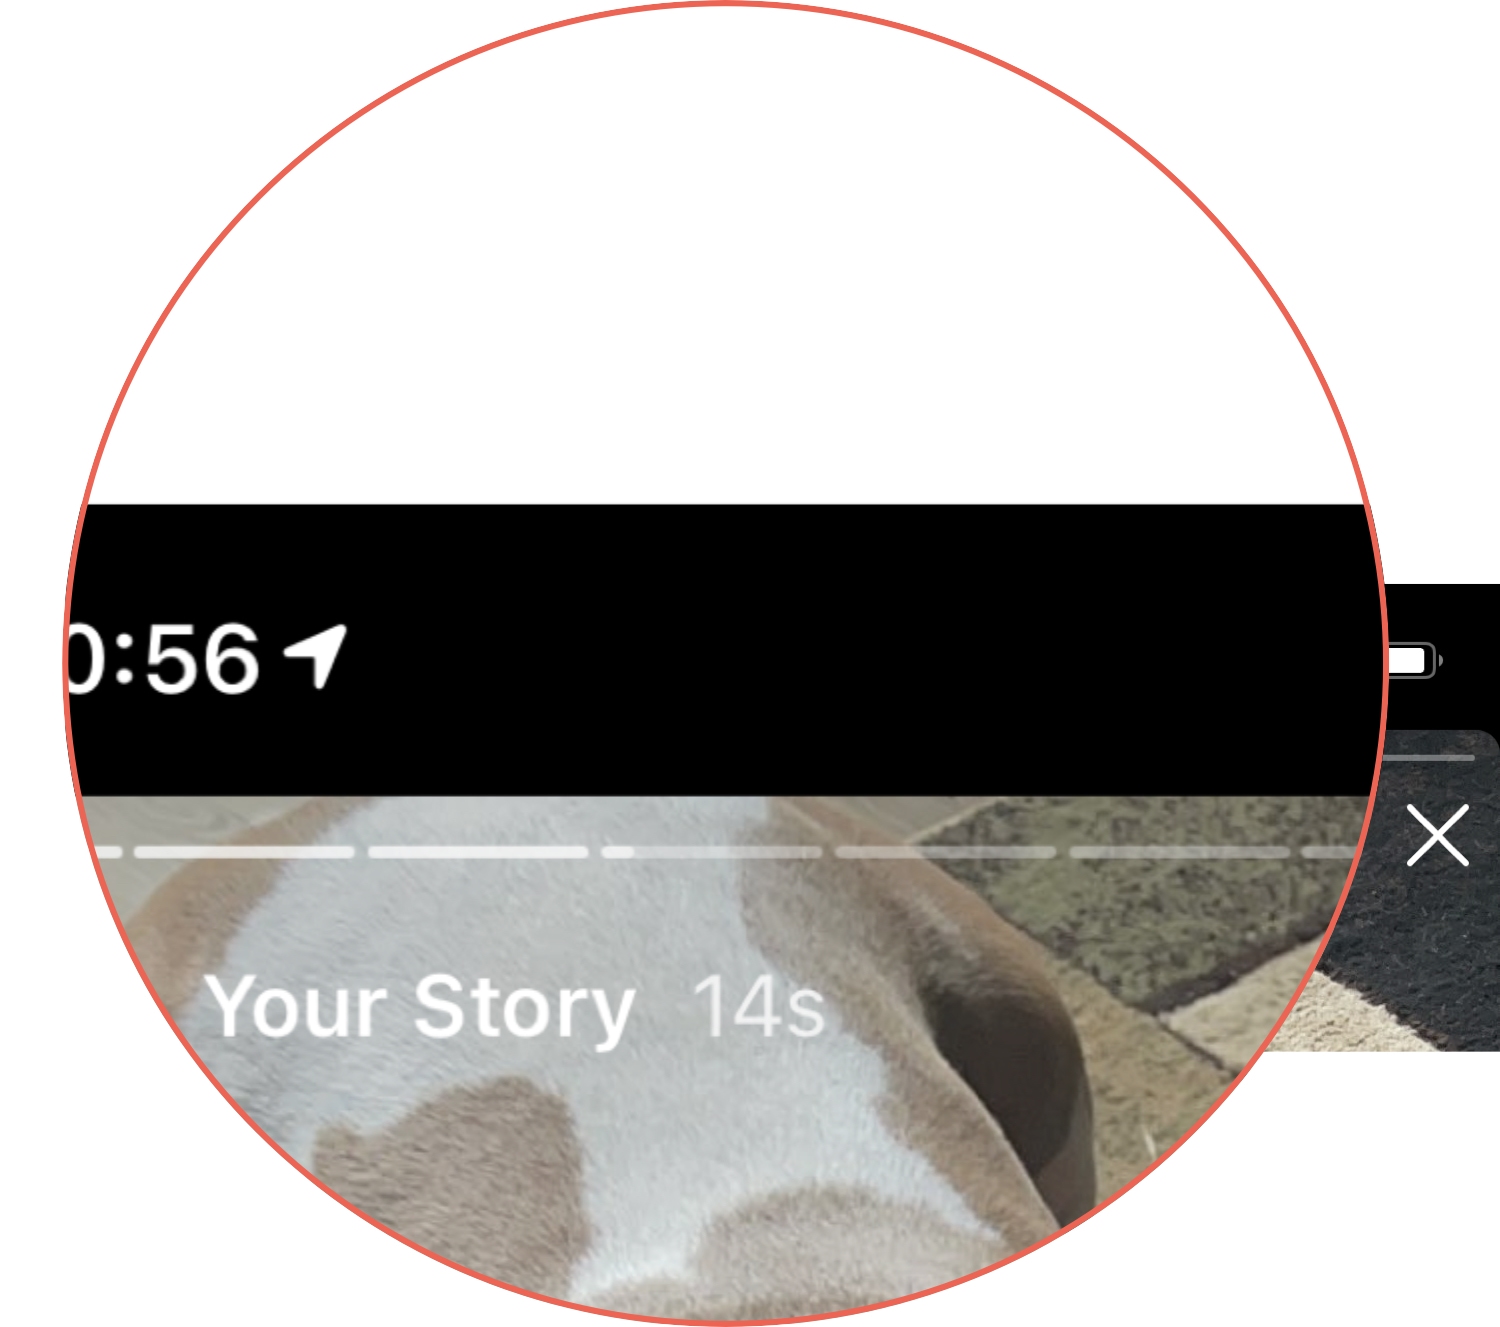 View Number of Photos for Multi-Capture in Instagram